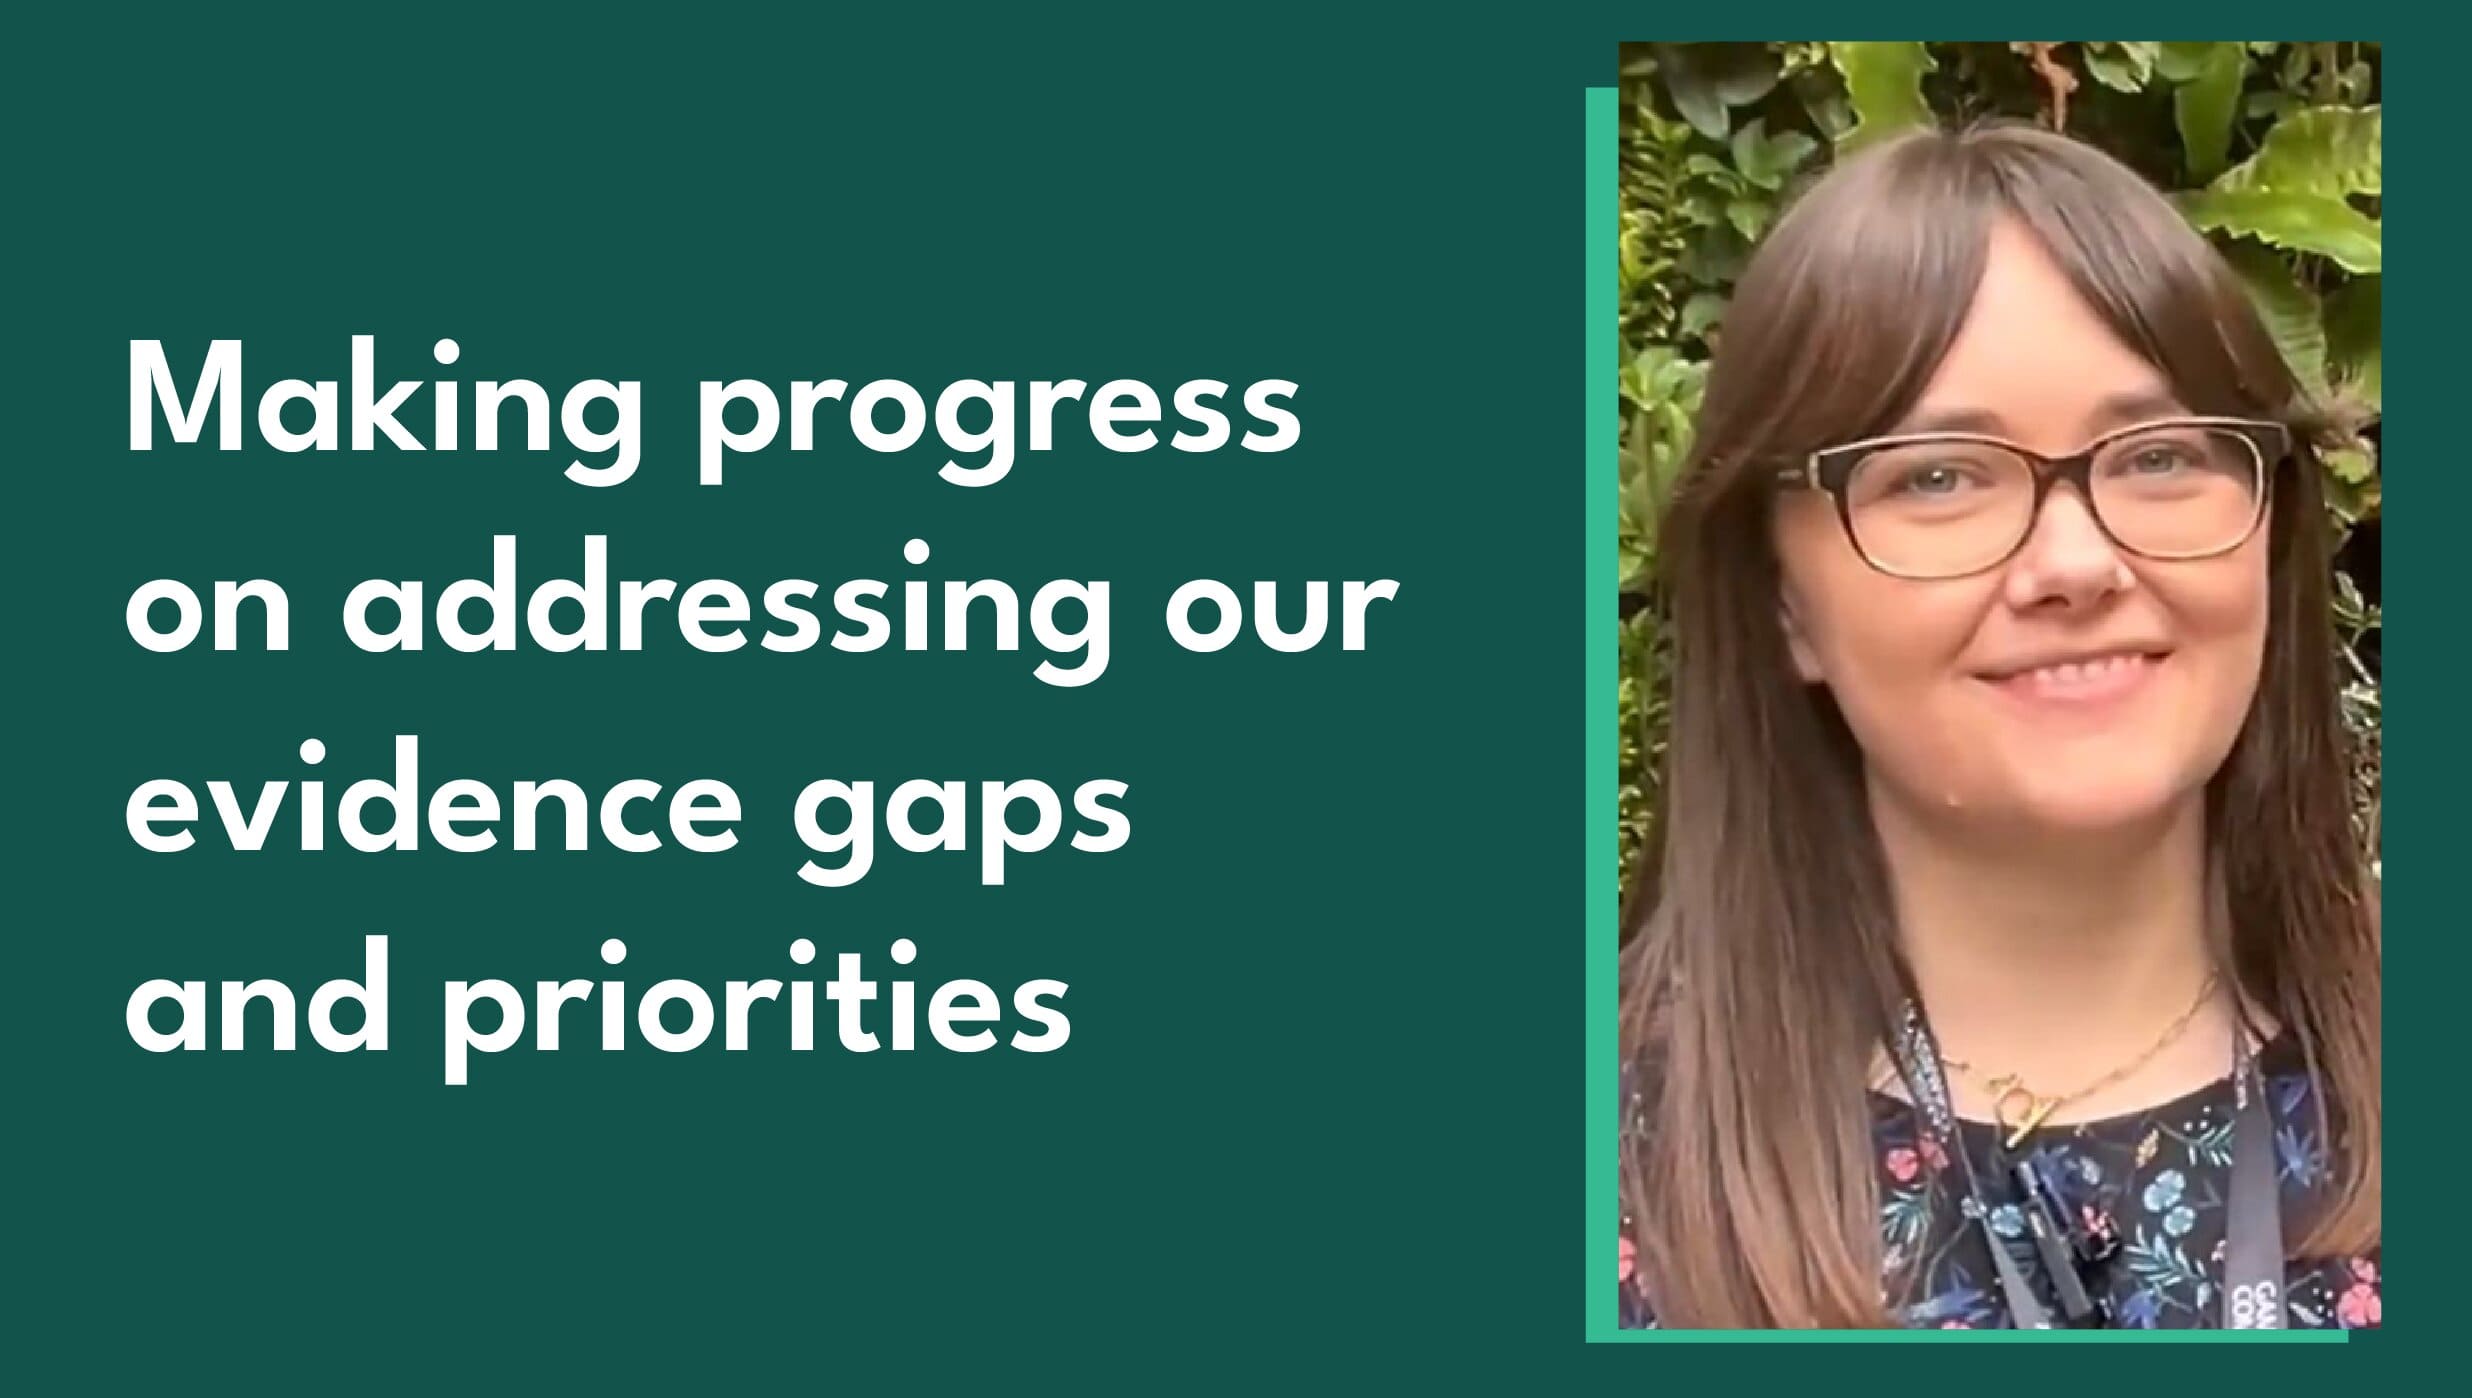 Image of Gambling Commission Head of Research, Laura Balla alongside the blog post title - 'Making progress on addressing our evidence gaps and priorities'